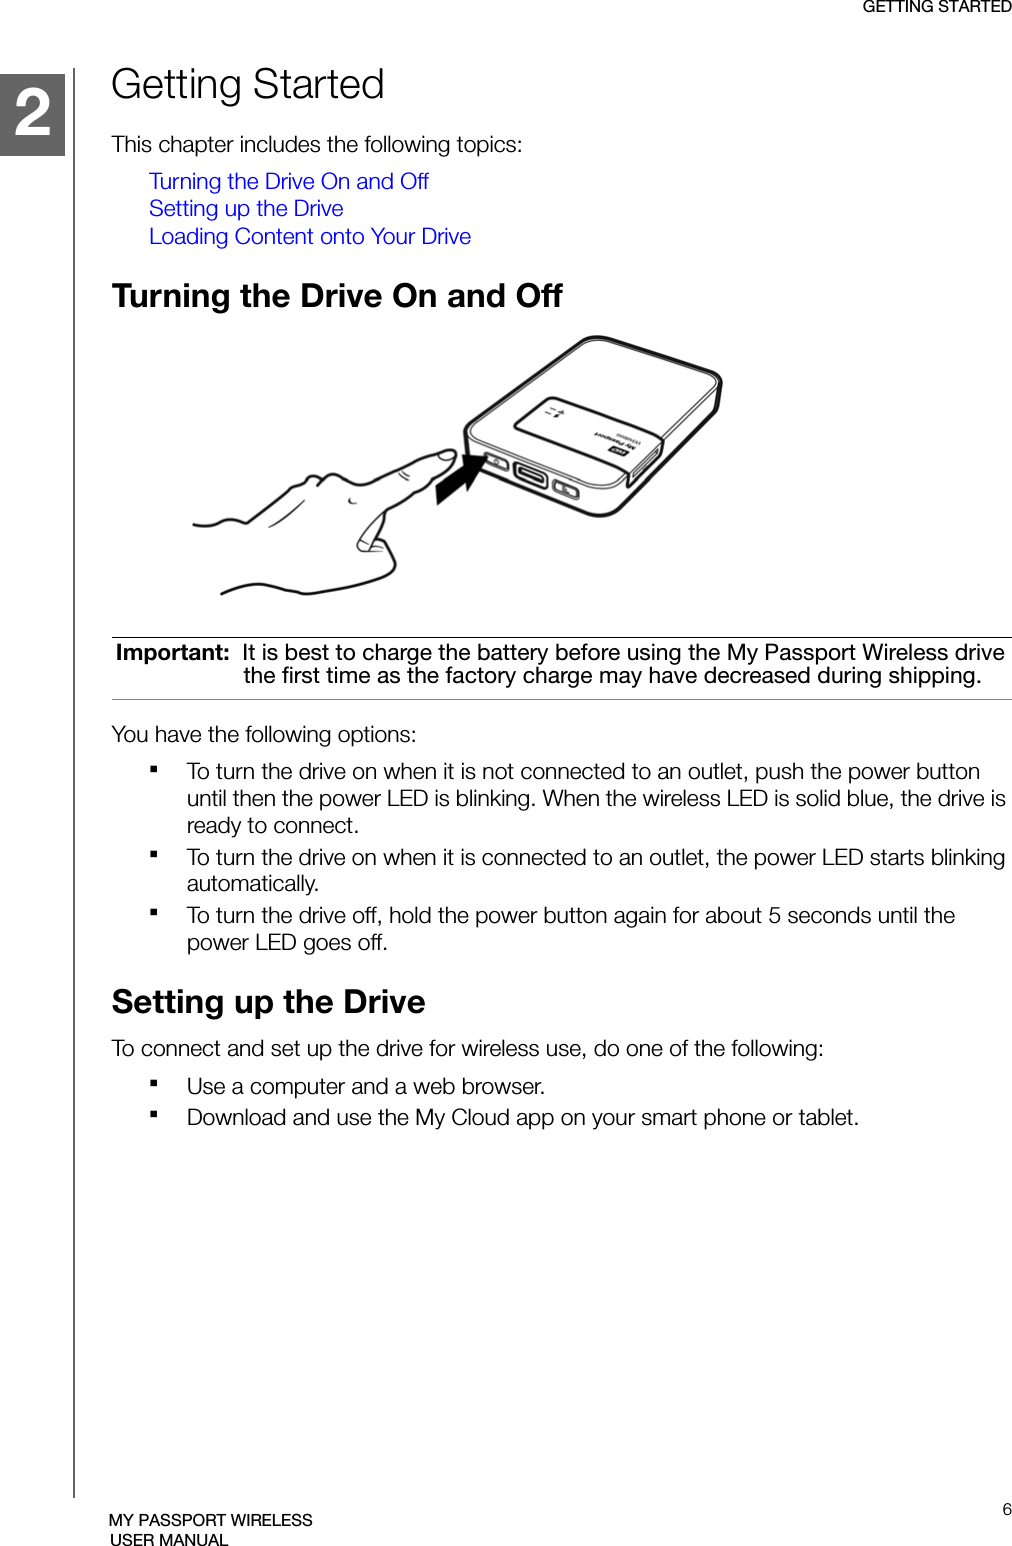 GETTING STARTED6MY PASSPORT WIRELESSUSER MANUALGetting StartedThis chapter includes the following topics:Turning the Drive On and OffSetting up the DriveLoading Content onto Your DriveTurning the Drive On and OffYou have the following options:To turn the drive on when it is not connected to an outlet, push the power button until then the power LED is blinking. When the wireless LED is solid blue, the drive is ready to connect. To turn the drive on when it is connected to an outlet, the power LED starts blinking automatically.To turn the drive off, hold the power button again for about 5 seconds until the power LED goes off.Setting up the DriveTo connect and set up the drive for wireless use, do one of the following:Use a computer and a web browser.Download and use the My Cloud app on your smart phone or tablet.Important:  It is best to charge the battery before using the My Passport Wireless drive the first time as the factory charge may have decreased during shipping.1212